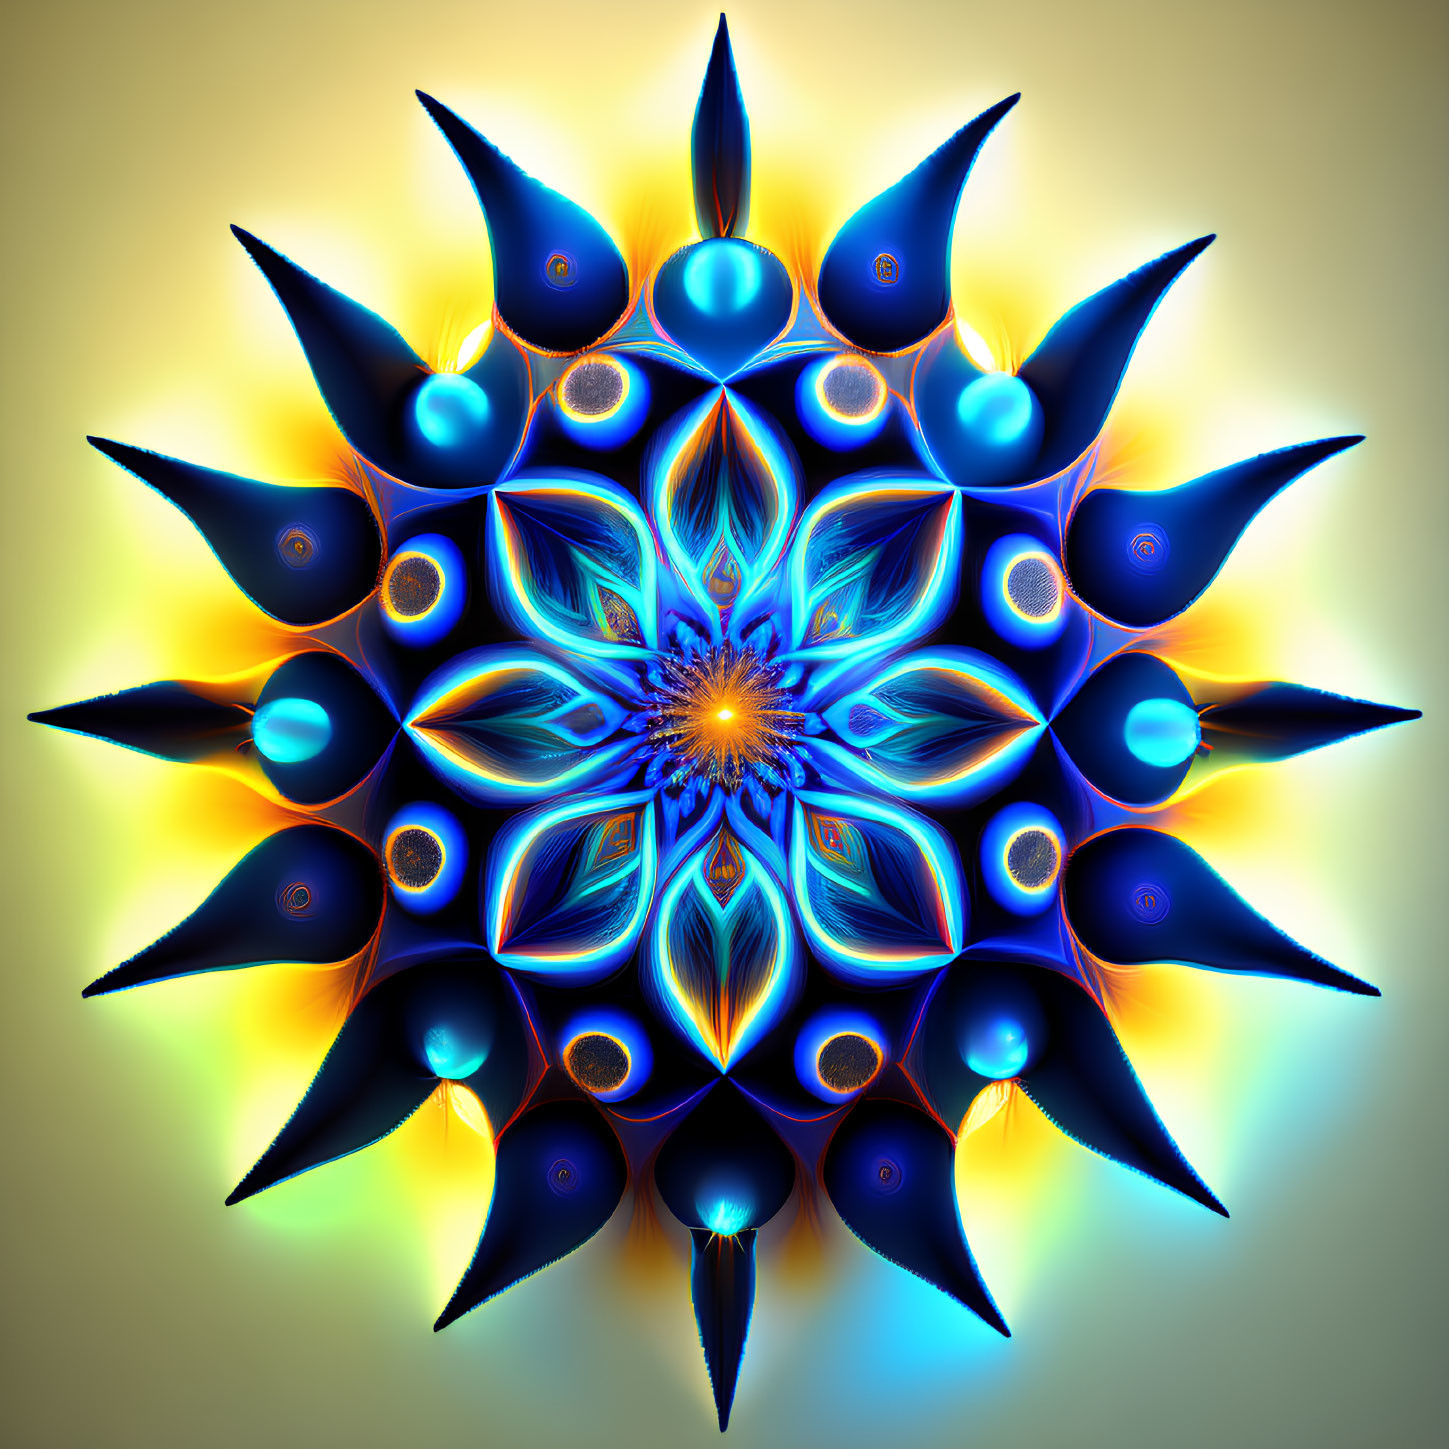 Symmetrical blue and yellow fractal with star-like patterns